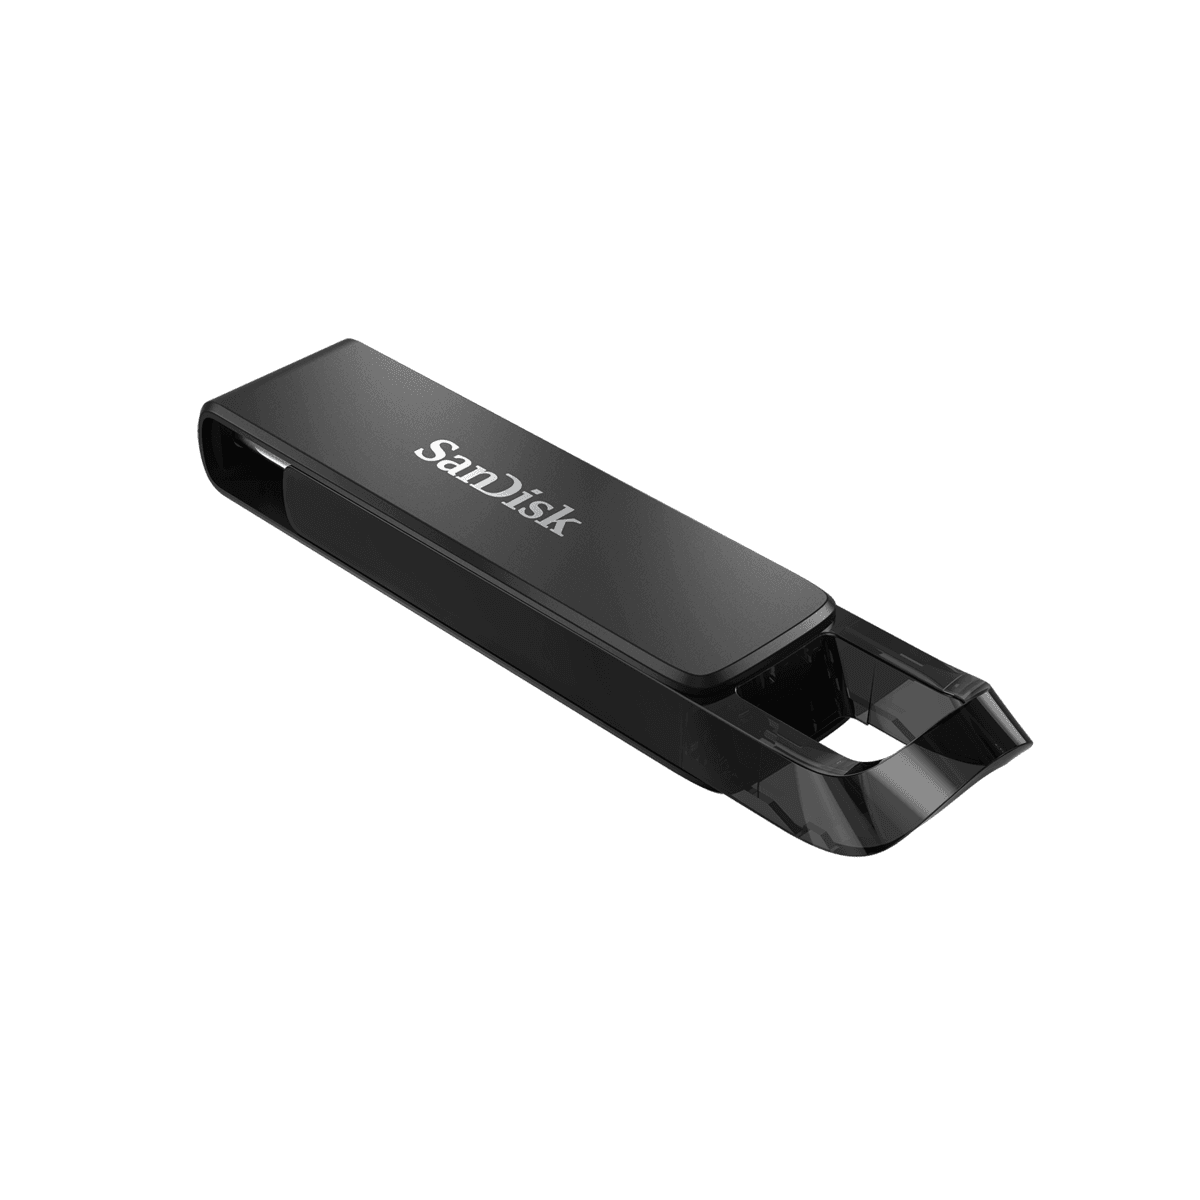 Selected image for SANDISK USB Flash Drive Ultra 64 GB Type-C